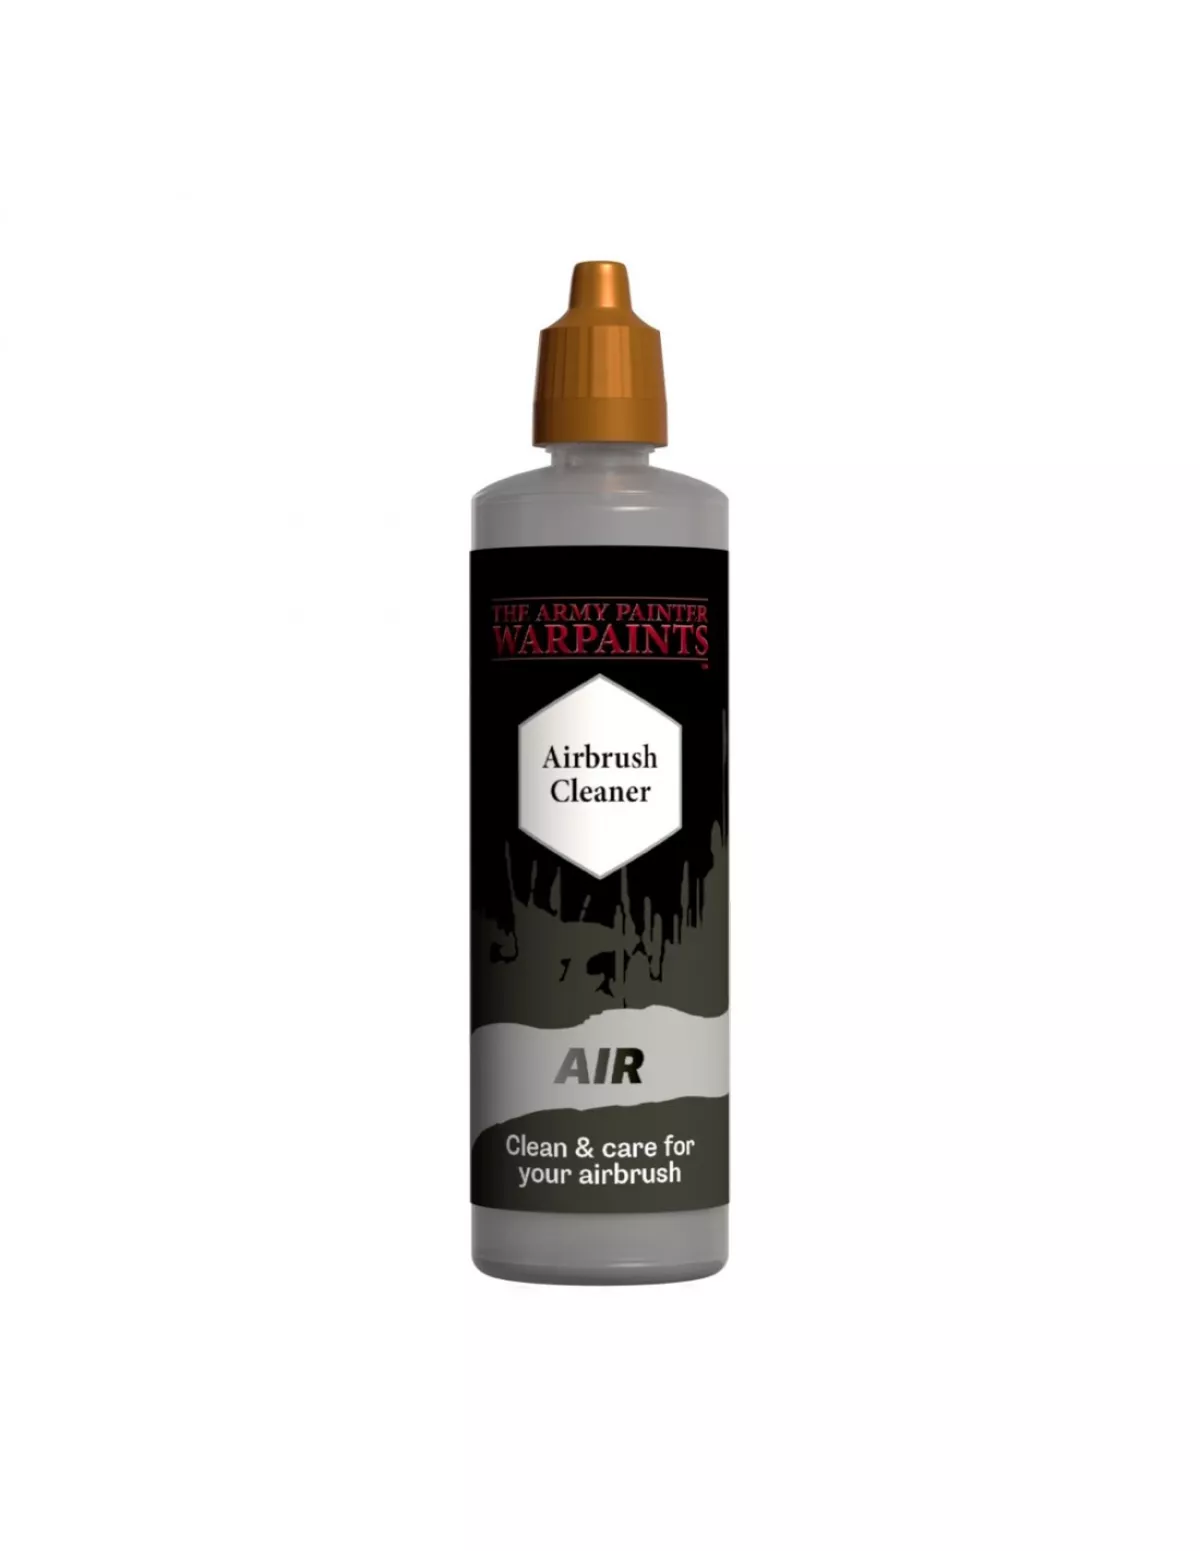 #2 - Airbrush Cleaner - Air - 100ml - Warpaints - The Army Painter